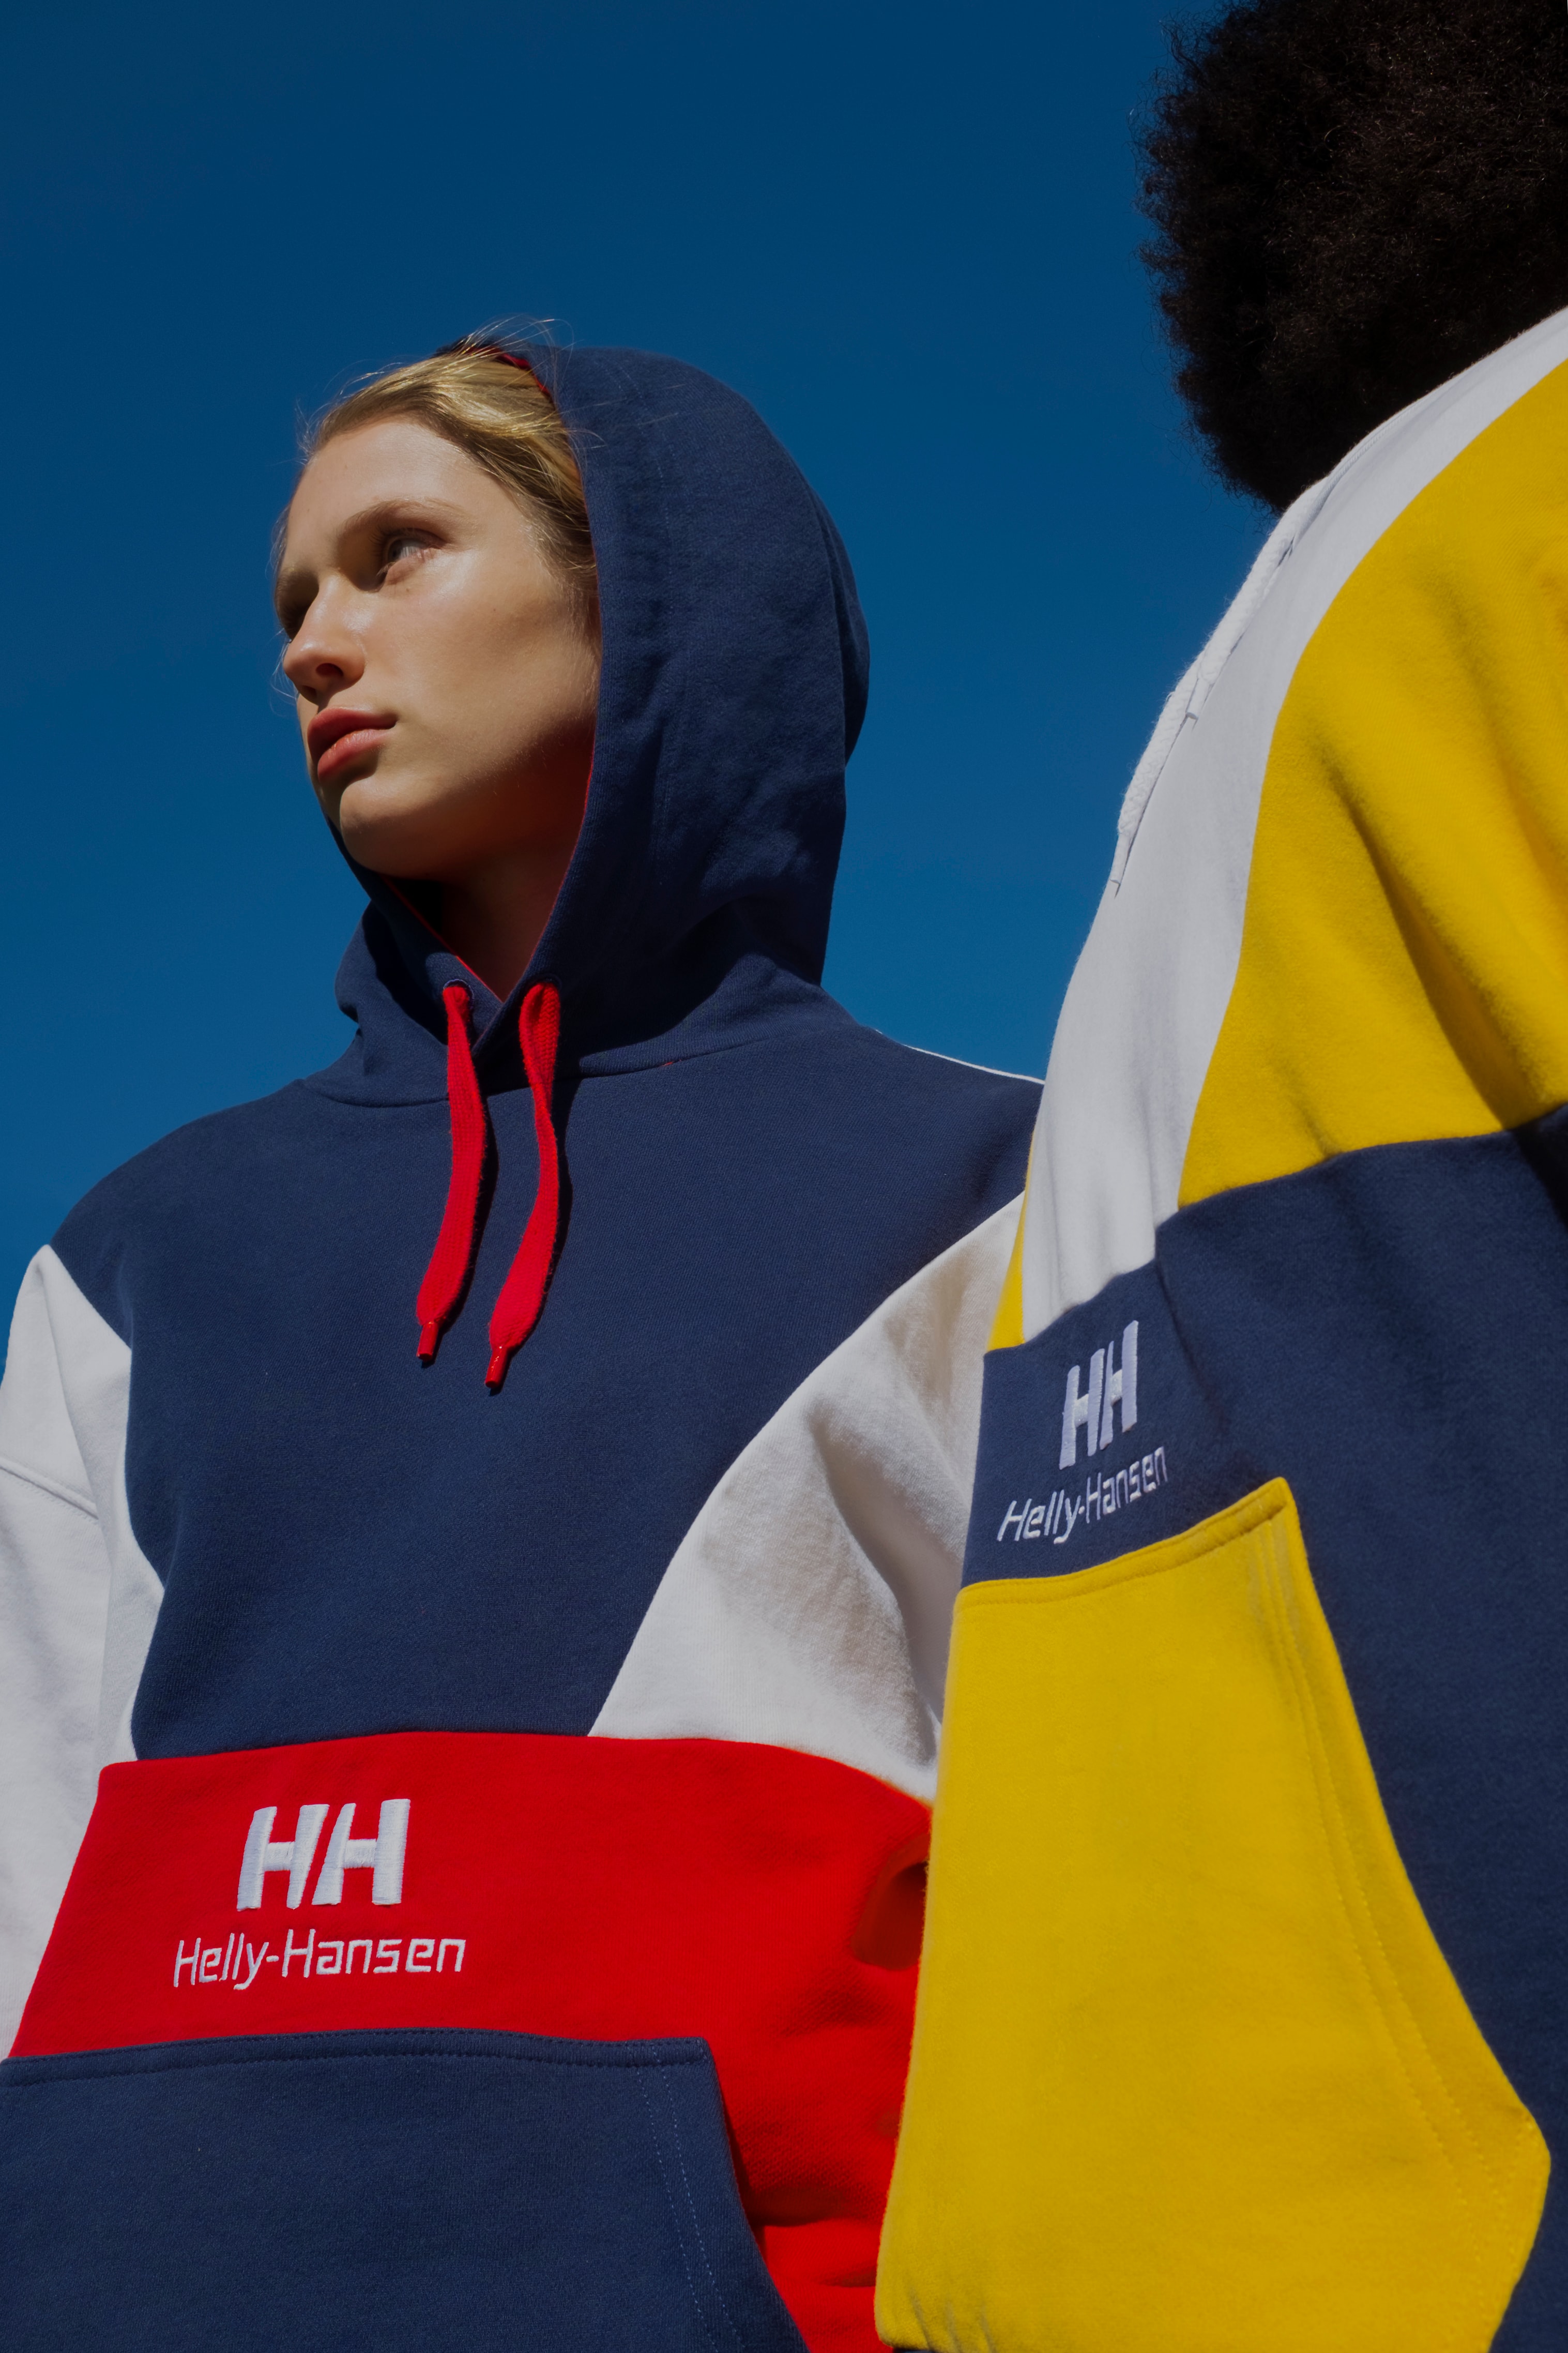 Helly Hansen Collection Streetwear "Young & Urban"